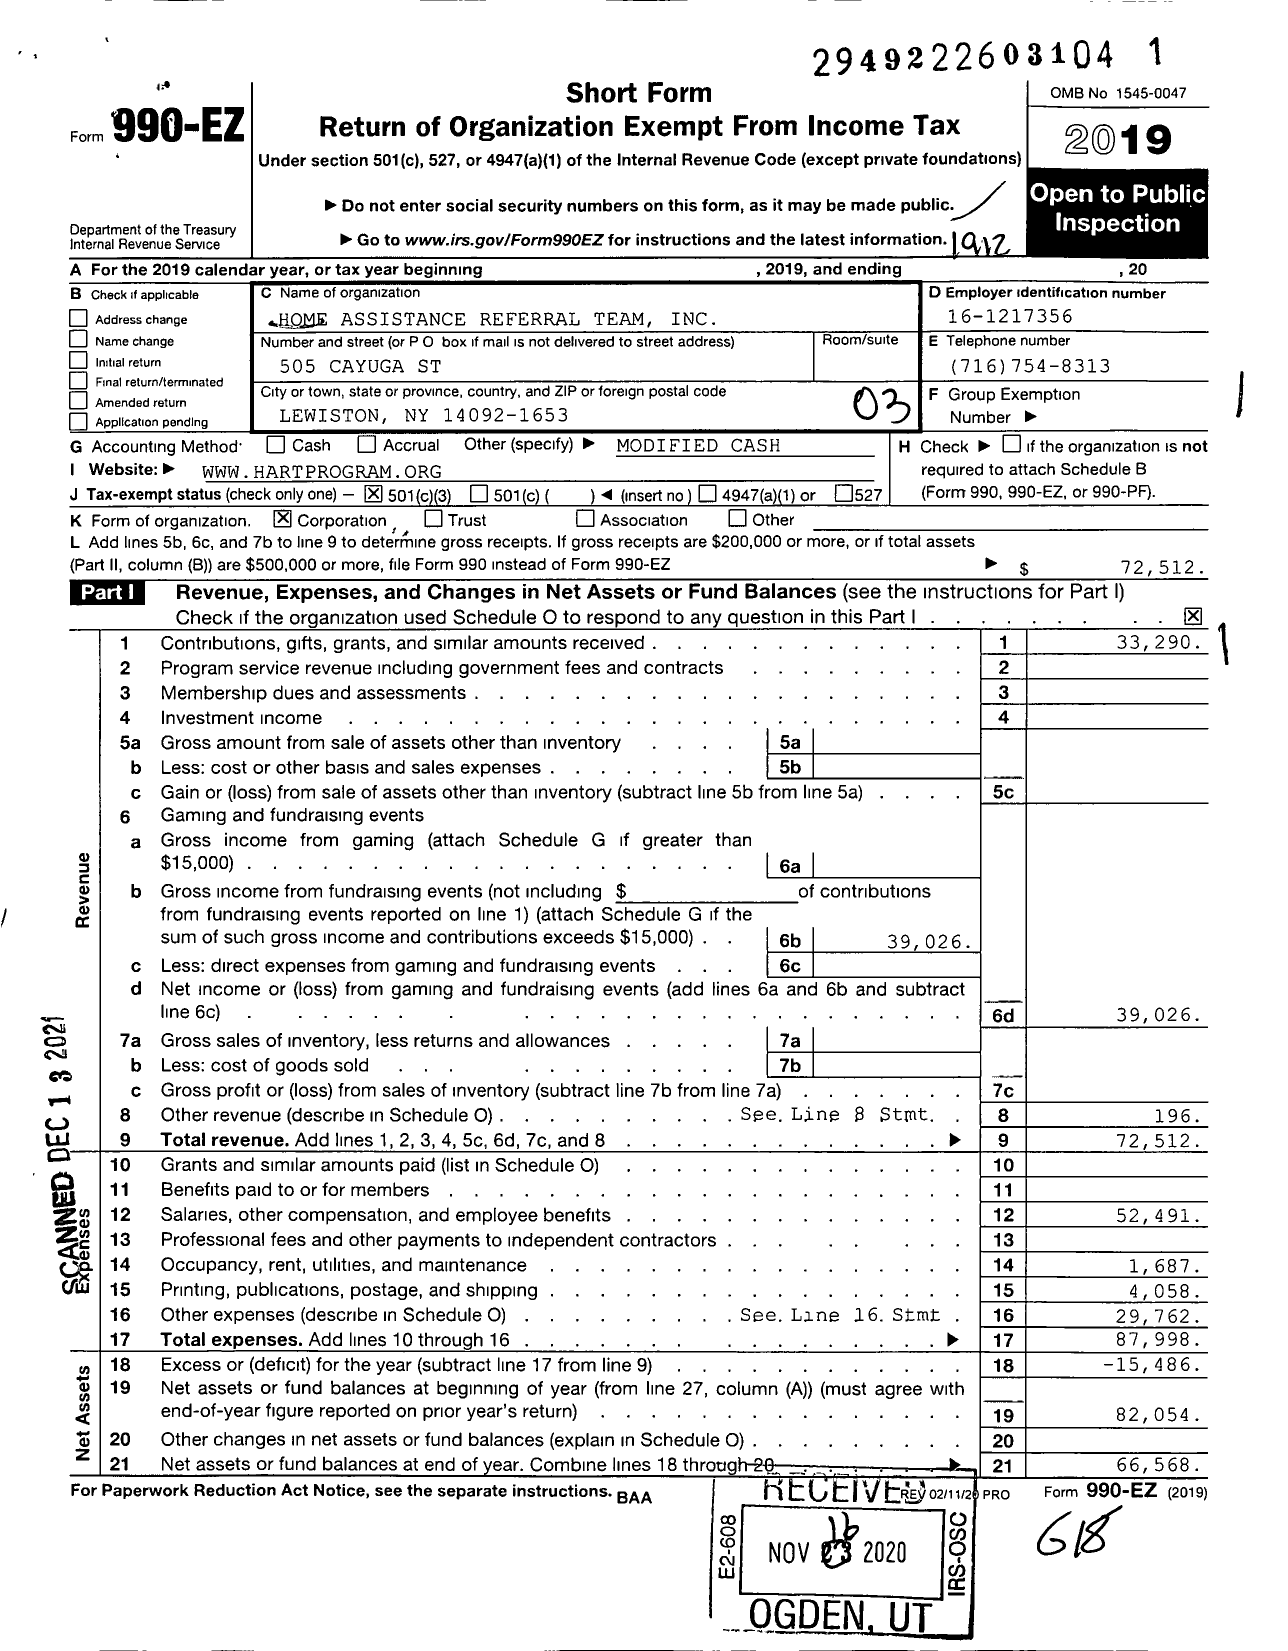 Image of first page of 2019 Form 990EZ for Home Assistance Referral Team